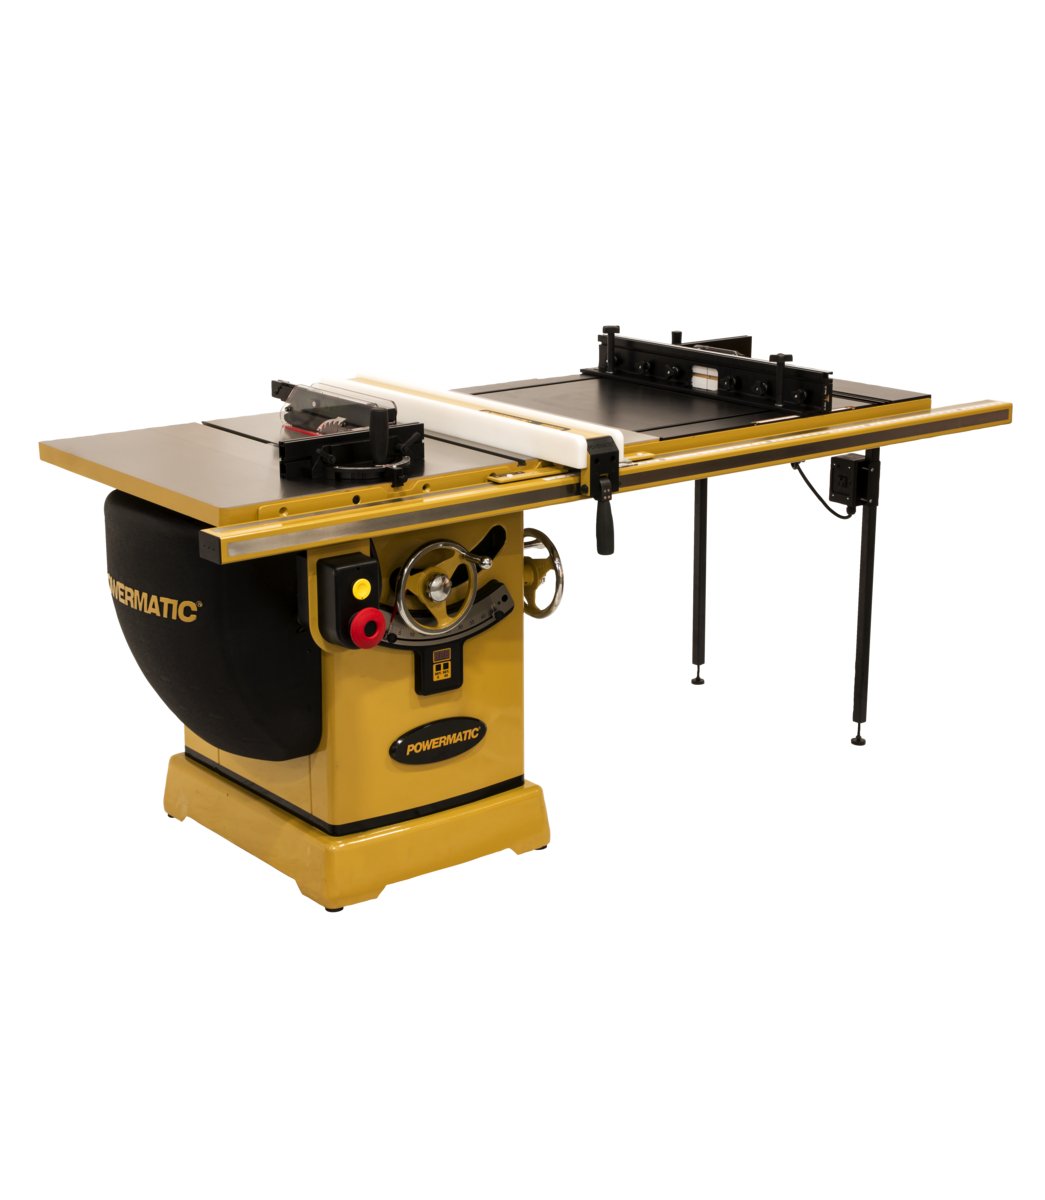 2000B Table Saw - 3HP 1PH 230V 50" RIP w/Accu-Fence & Router Lift - Diamond Tool Store